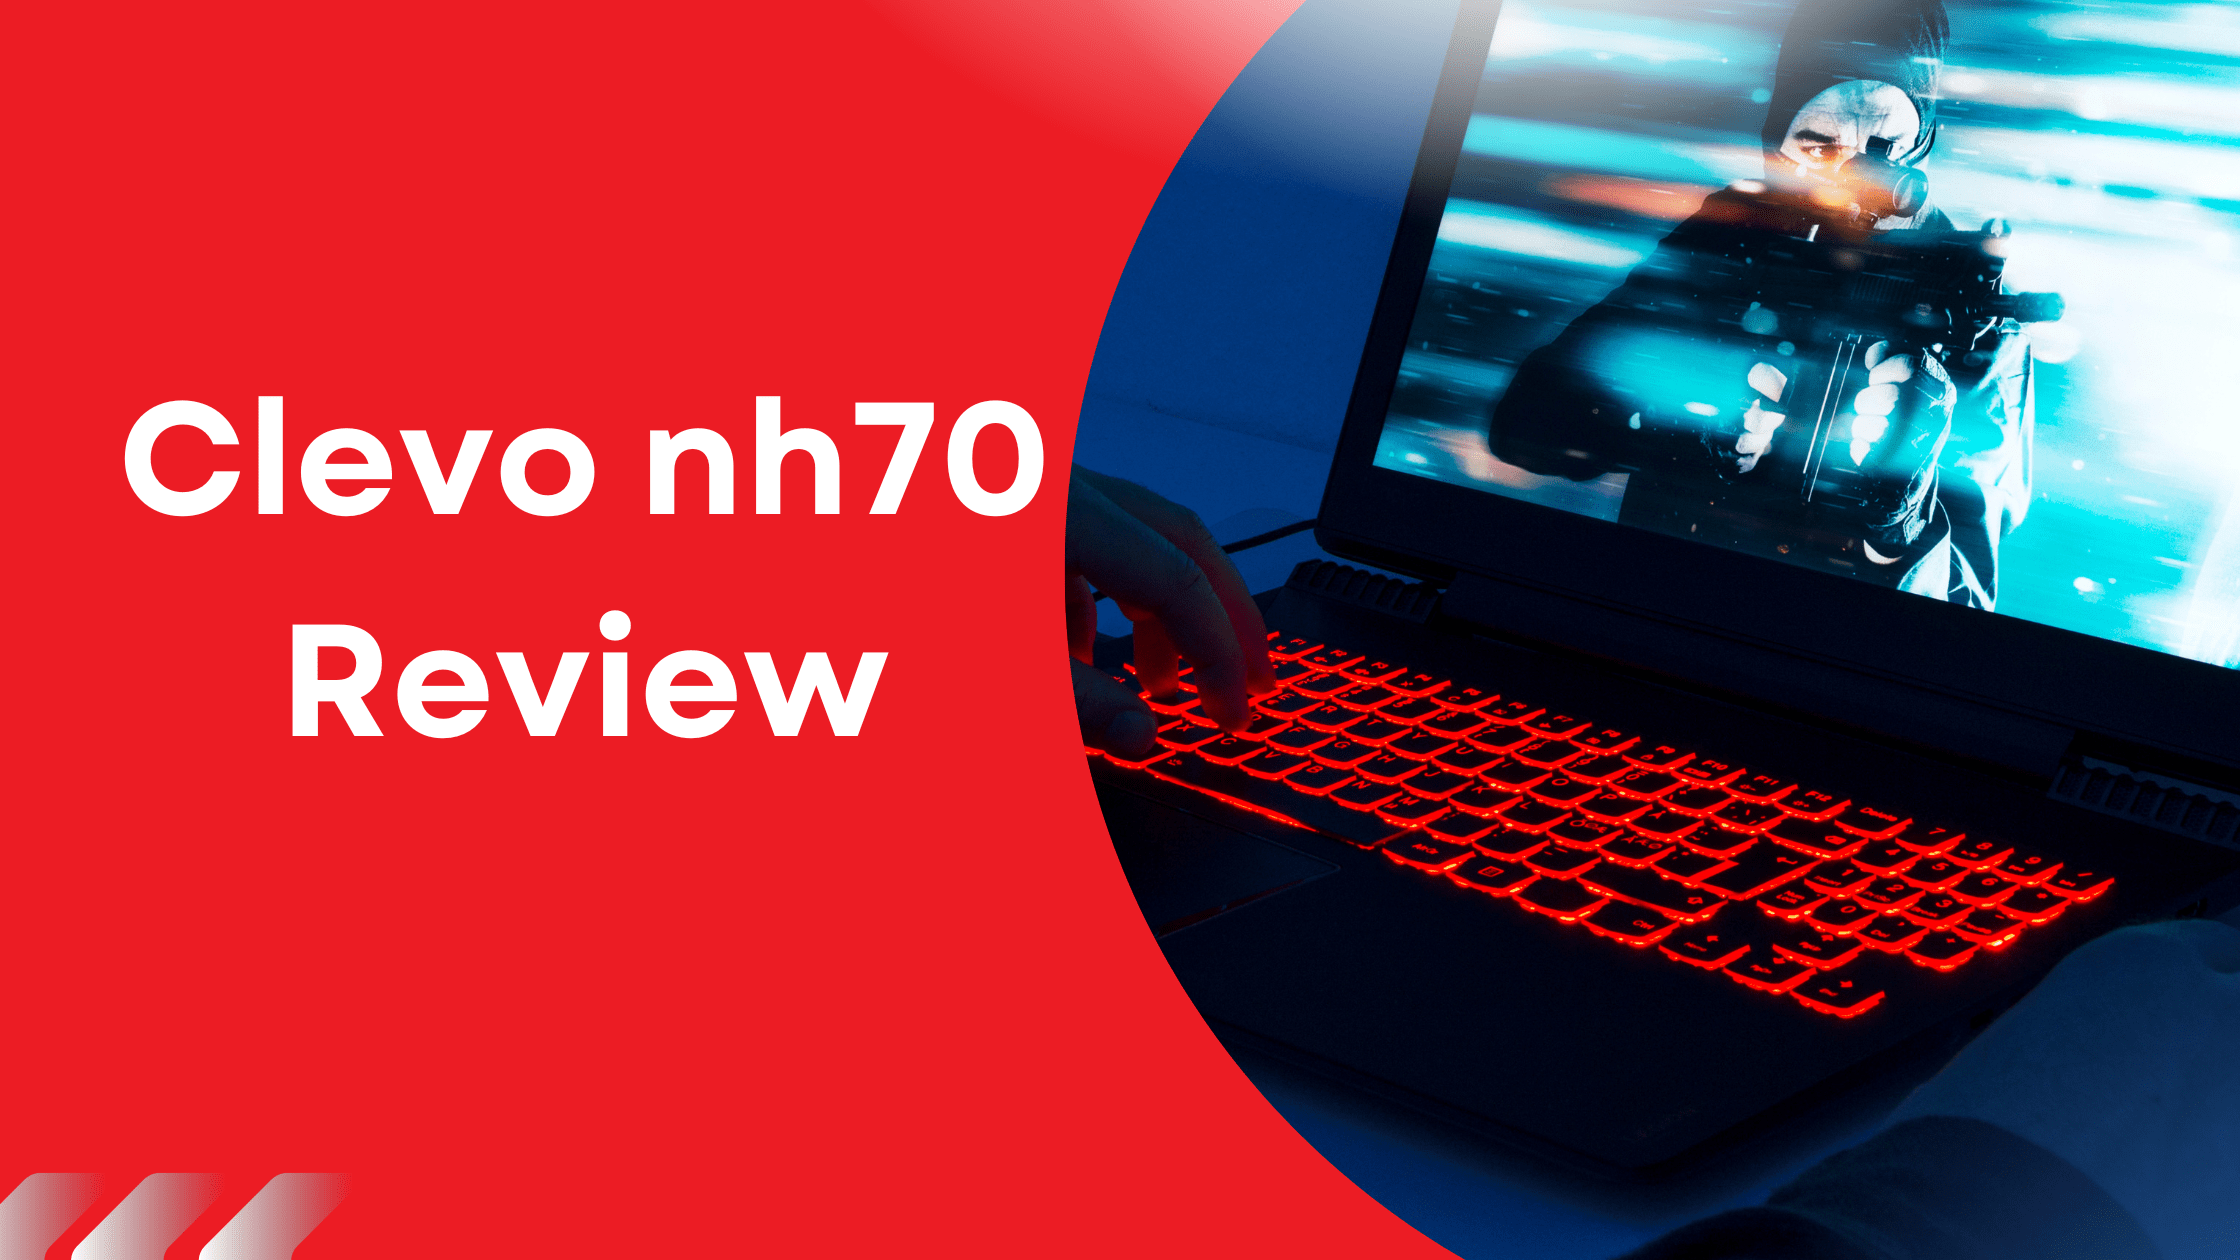 Clevo nh70 Review